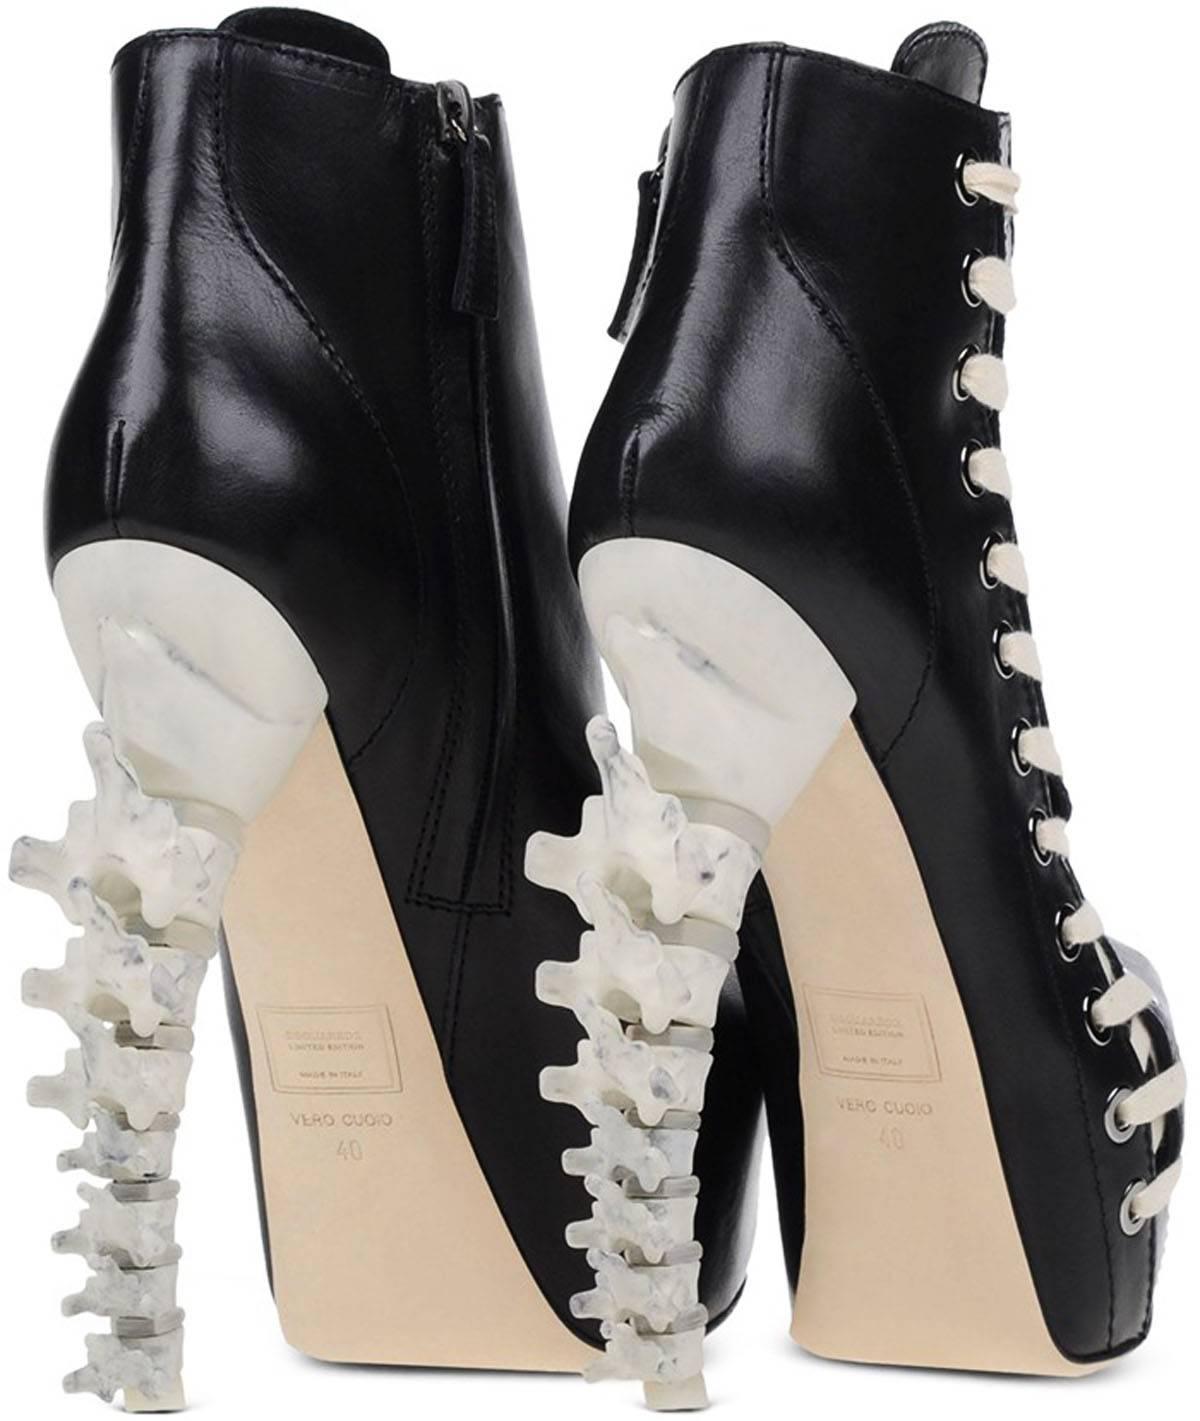 New Dsquared2 Limited Edition Icon Spine Heel Leather Ankle Booties
 Italian size 40 - US 10
 Color - Black
 100% Leather
 Faux Laces Along the Side
 Zip Closure on Side
 Hidden Platform - 2 inches
 Faux Bone Heel - 6 inches
 Shaft - 5.5 inches
